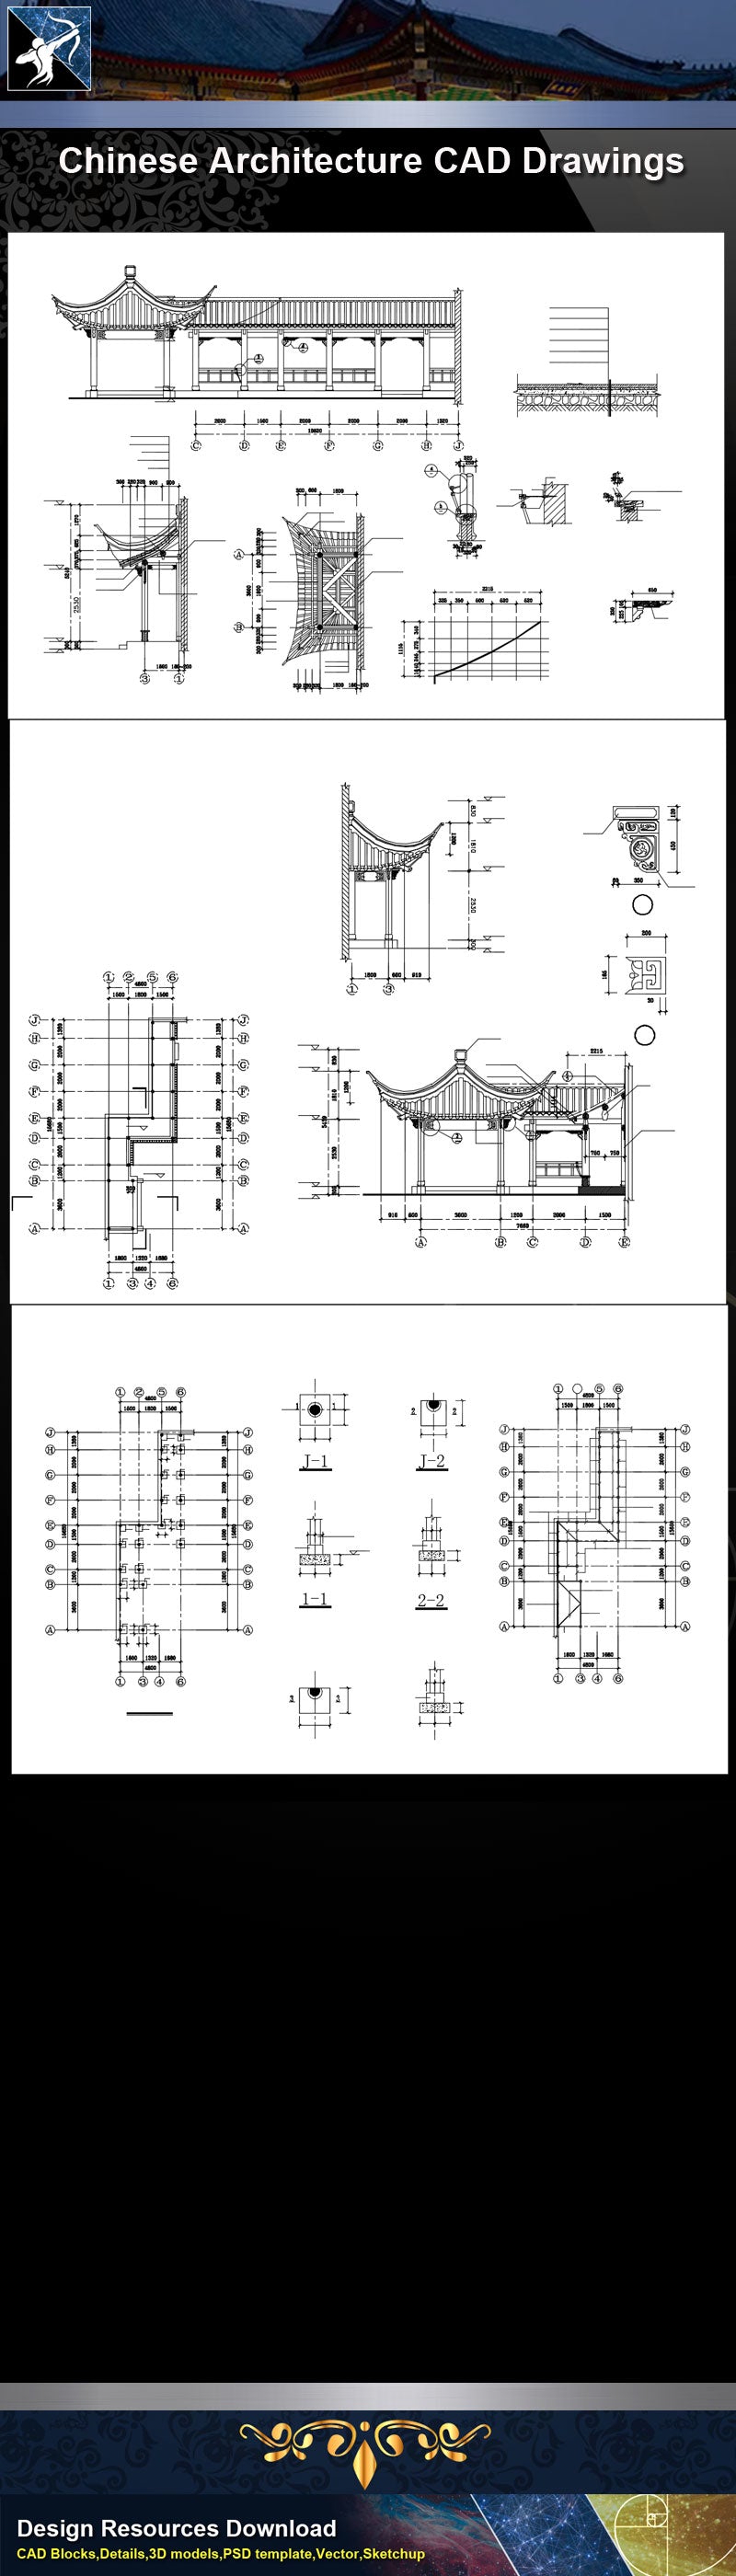 ★Chinese Architecture CAD Drawings-Chinese Garden Design